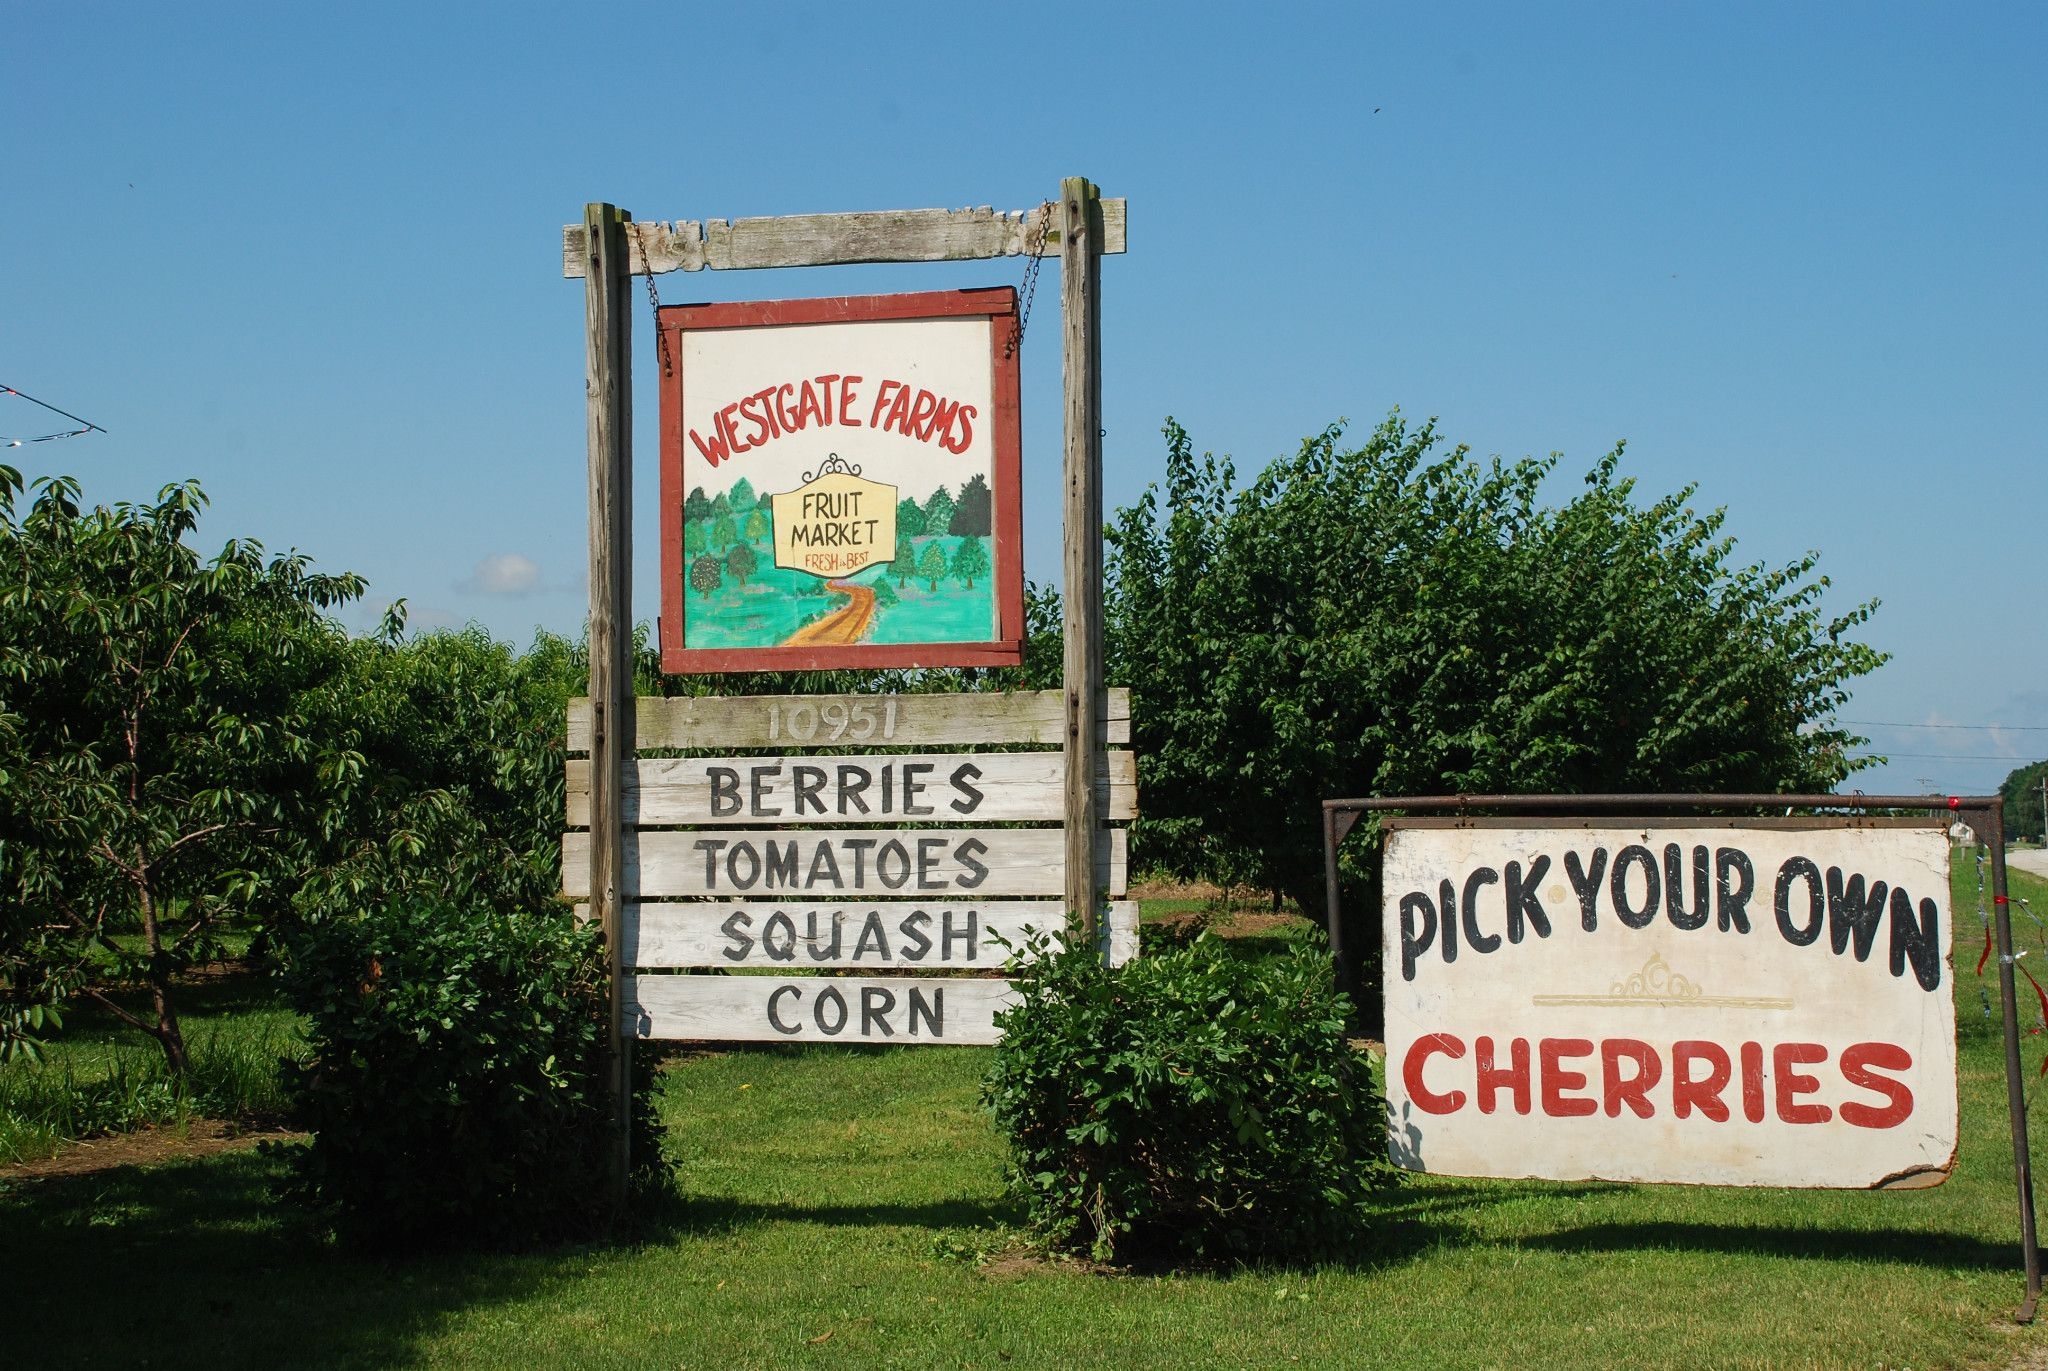 Local Goodness: Roadtrip For Ripe Cherries And Erie Beaches